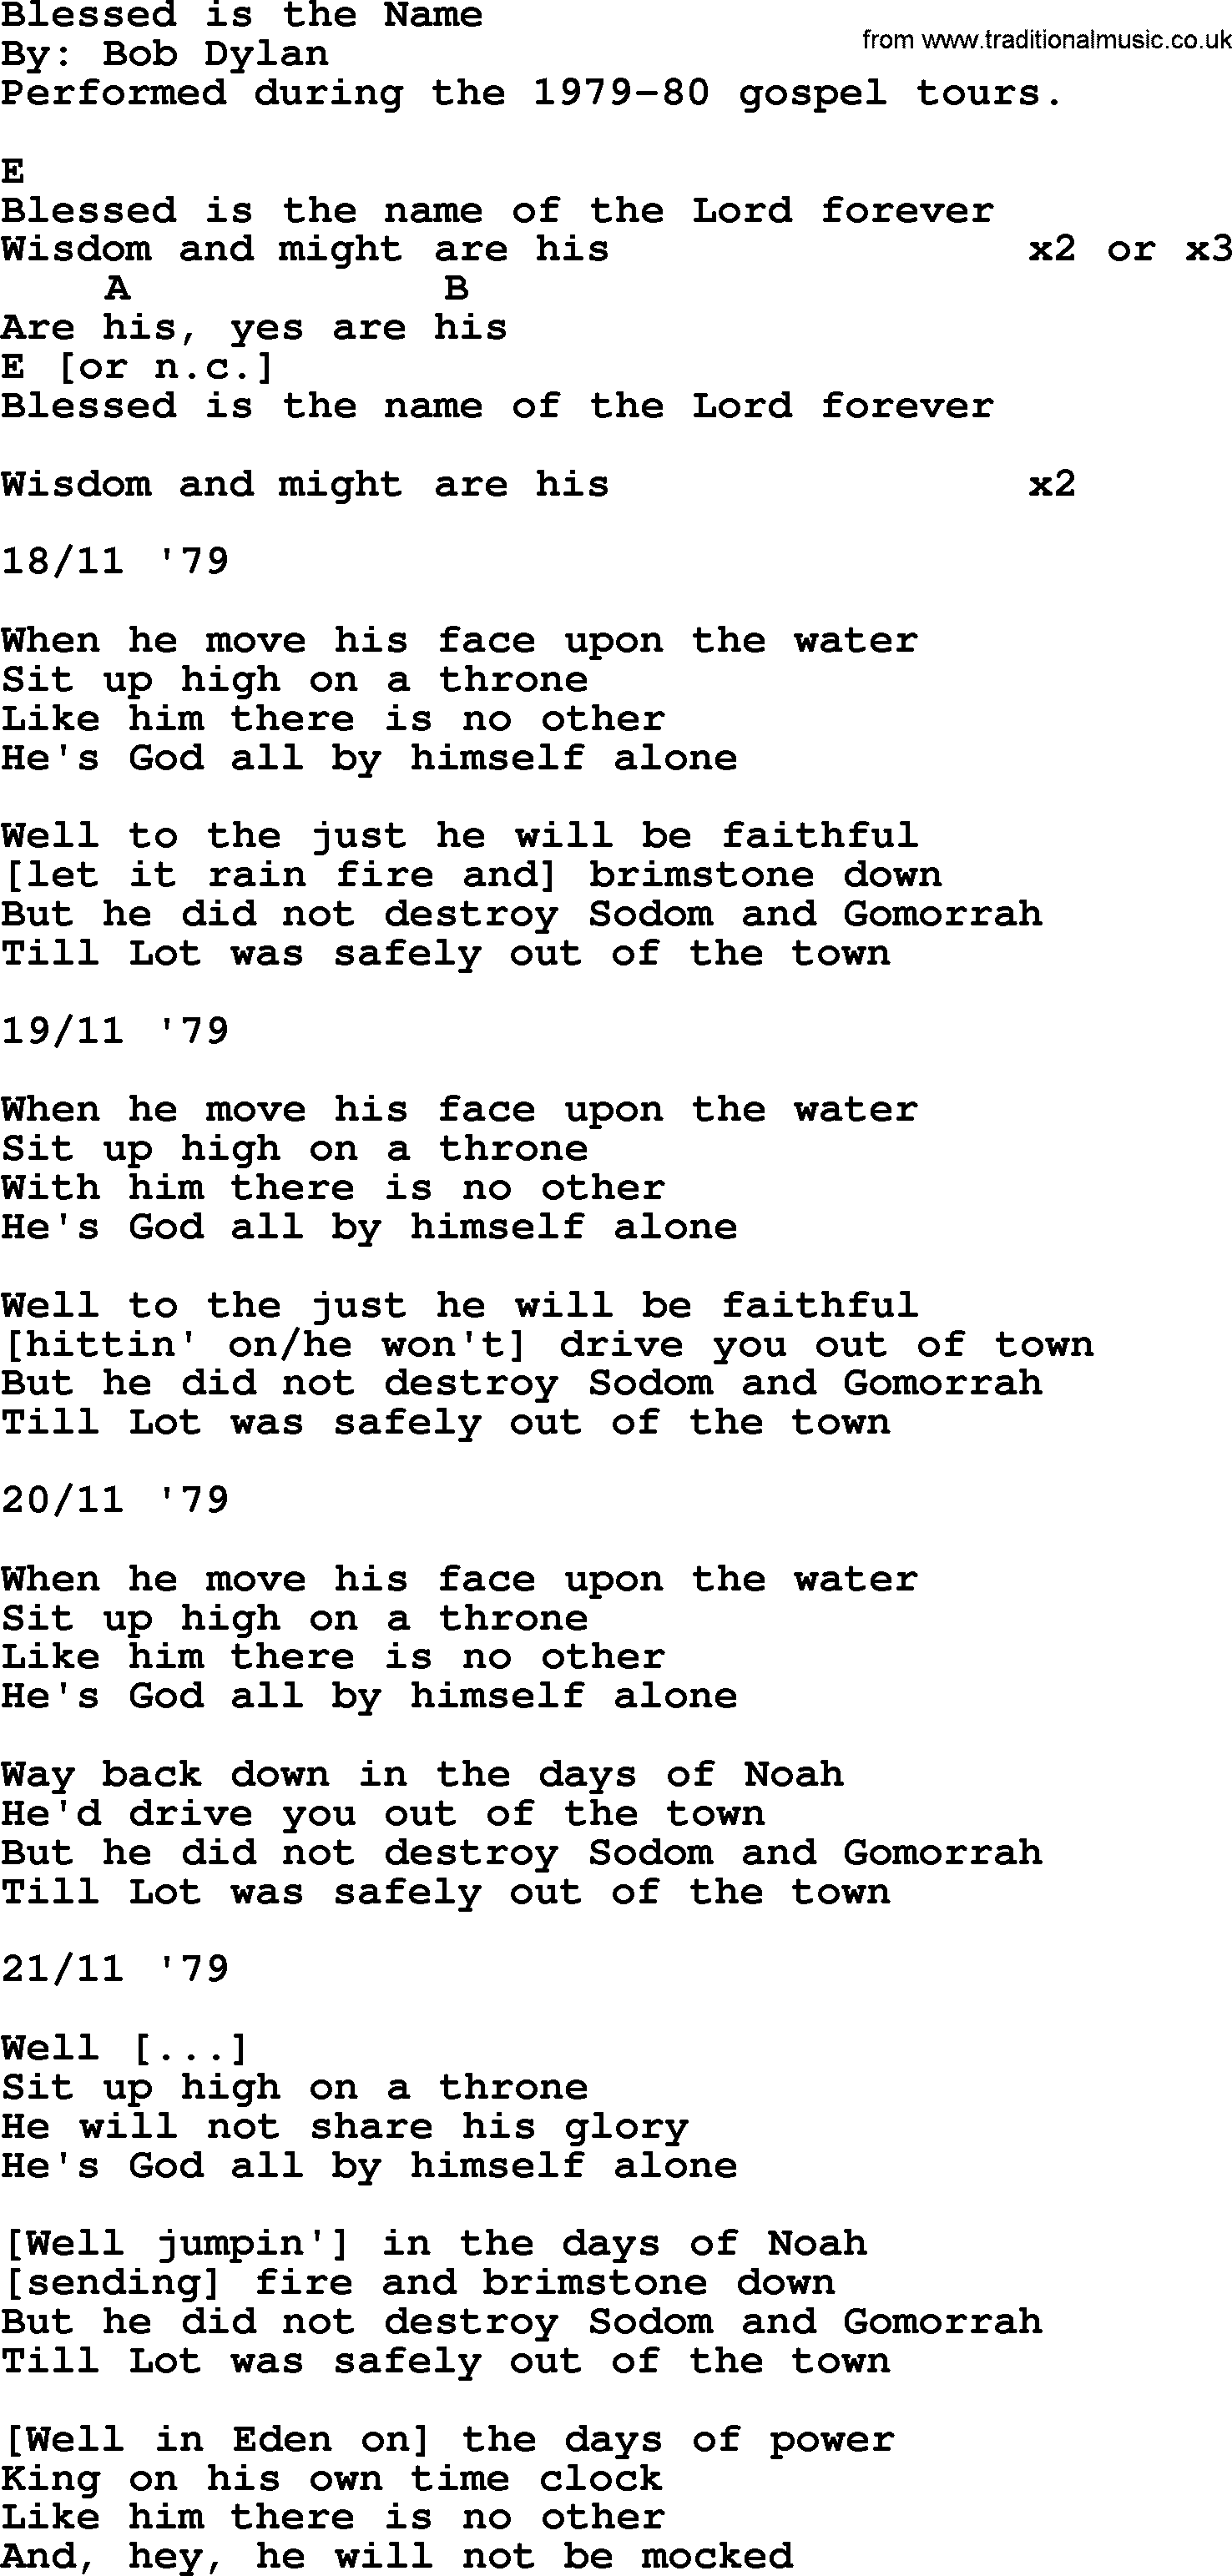 Bob Dylan song, lyrics with chords - Blessed is the Name